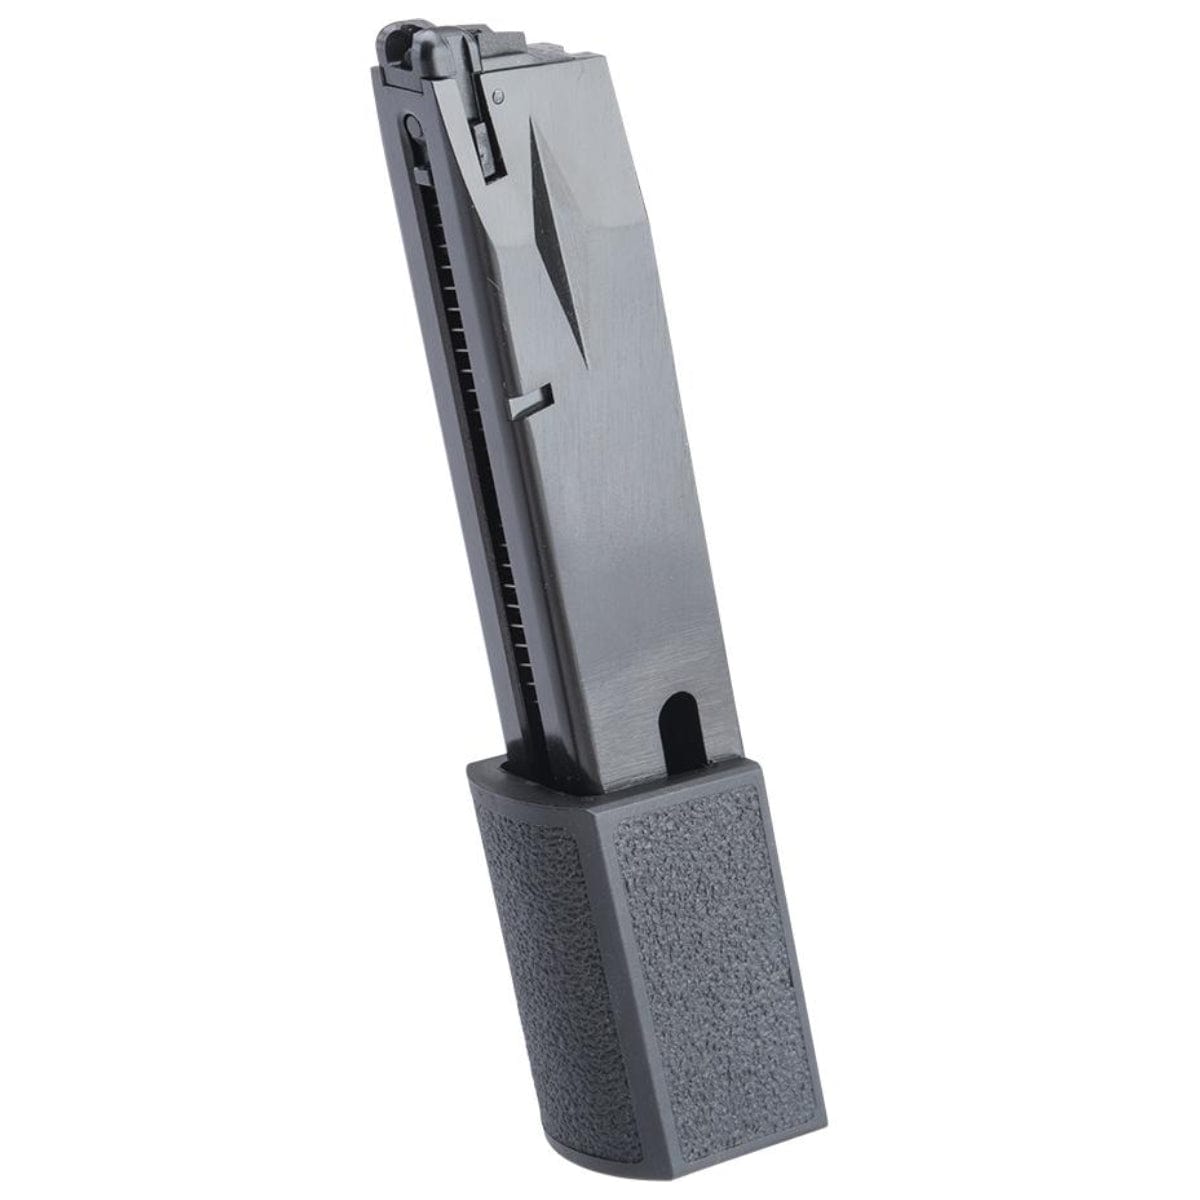 Airsportinggoods SRC SR92 GAS EXTENDED MAGAZINE 6MM AIRSOFT 33 ROUNDS